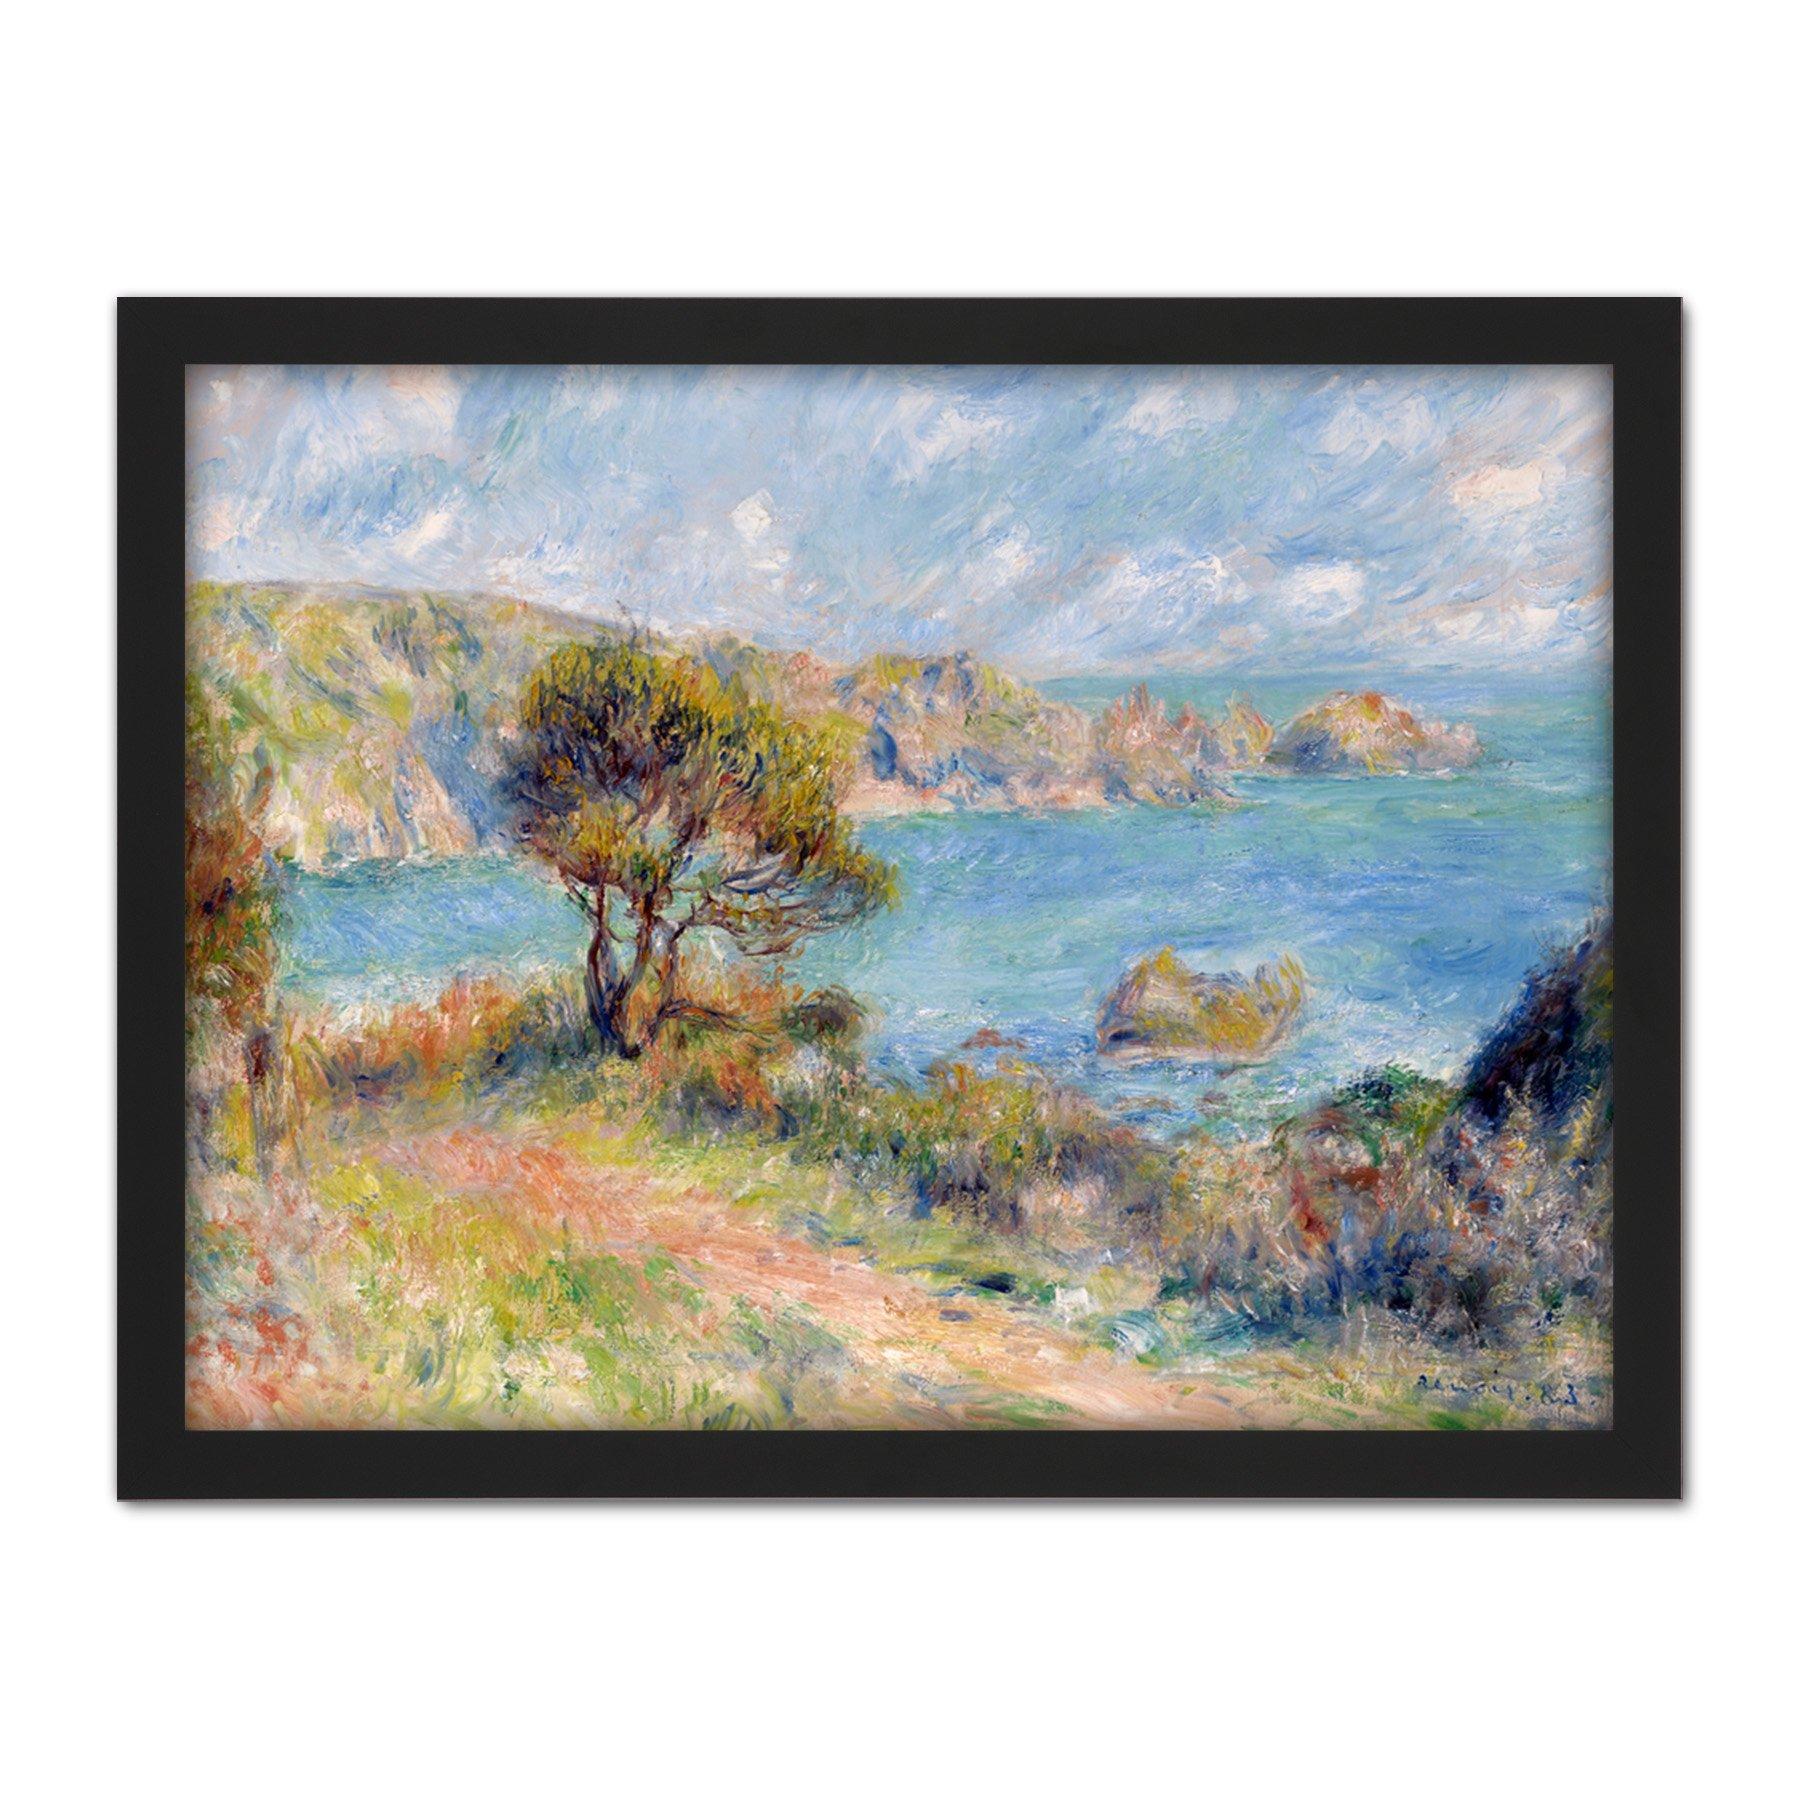 Pierre Auguste Renoir View At Guernsey 1883 Painting Large Framed Wall Decor Art Print